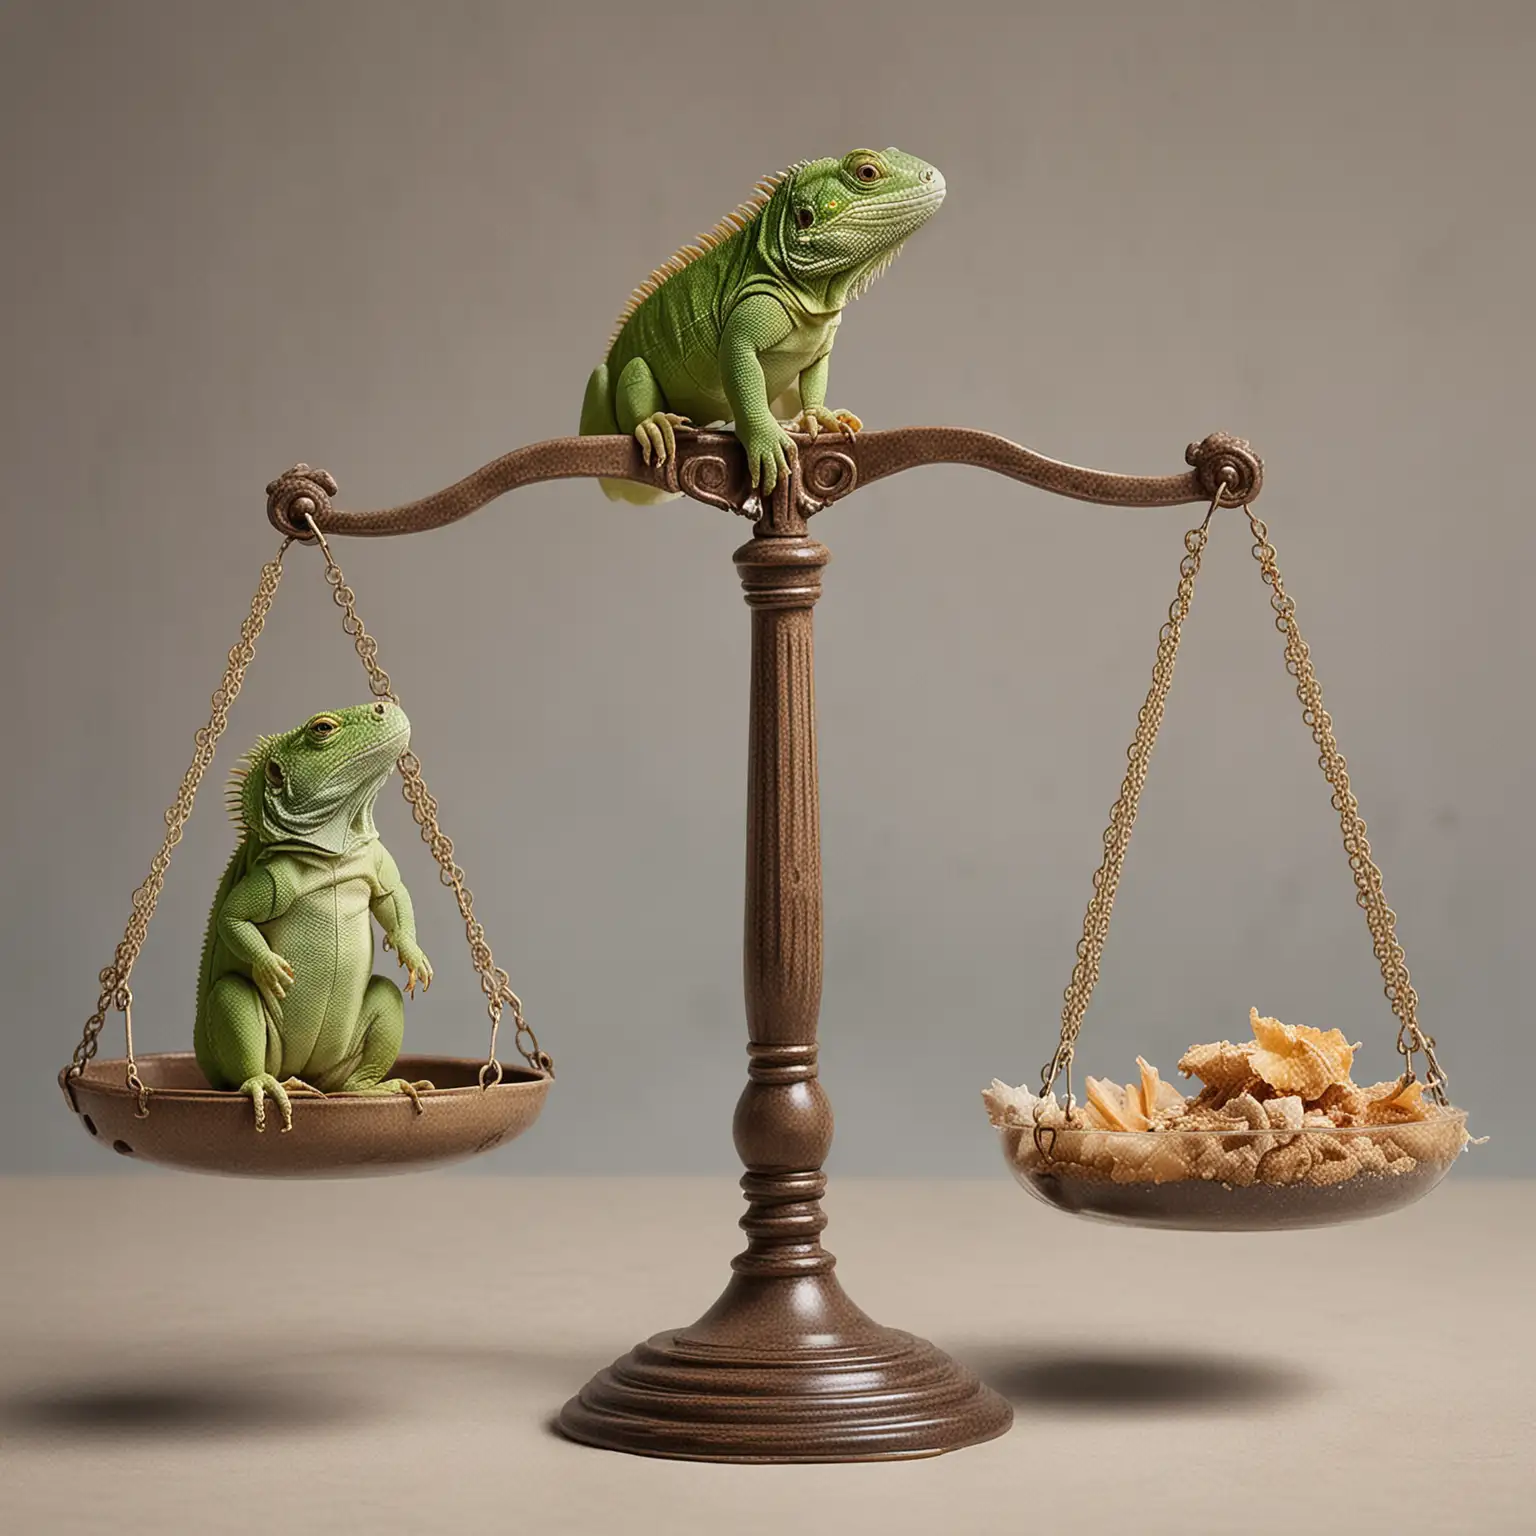 Scales of justice with one iguana on one scale and one hamster on the other scale  